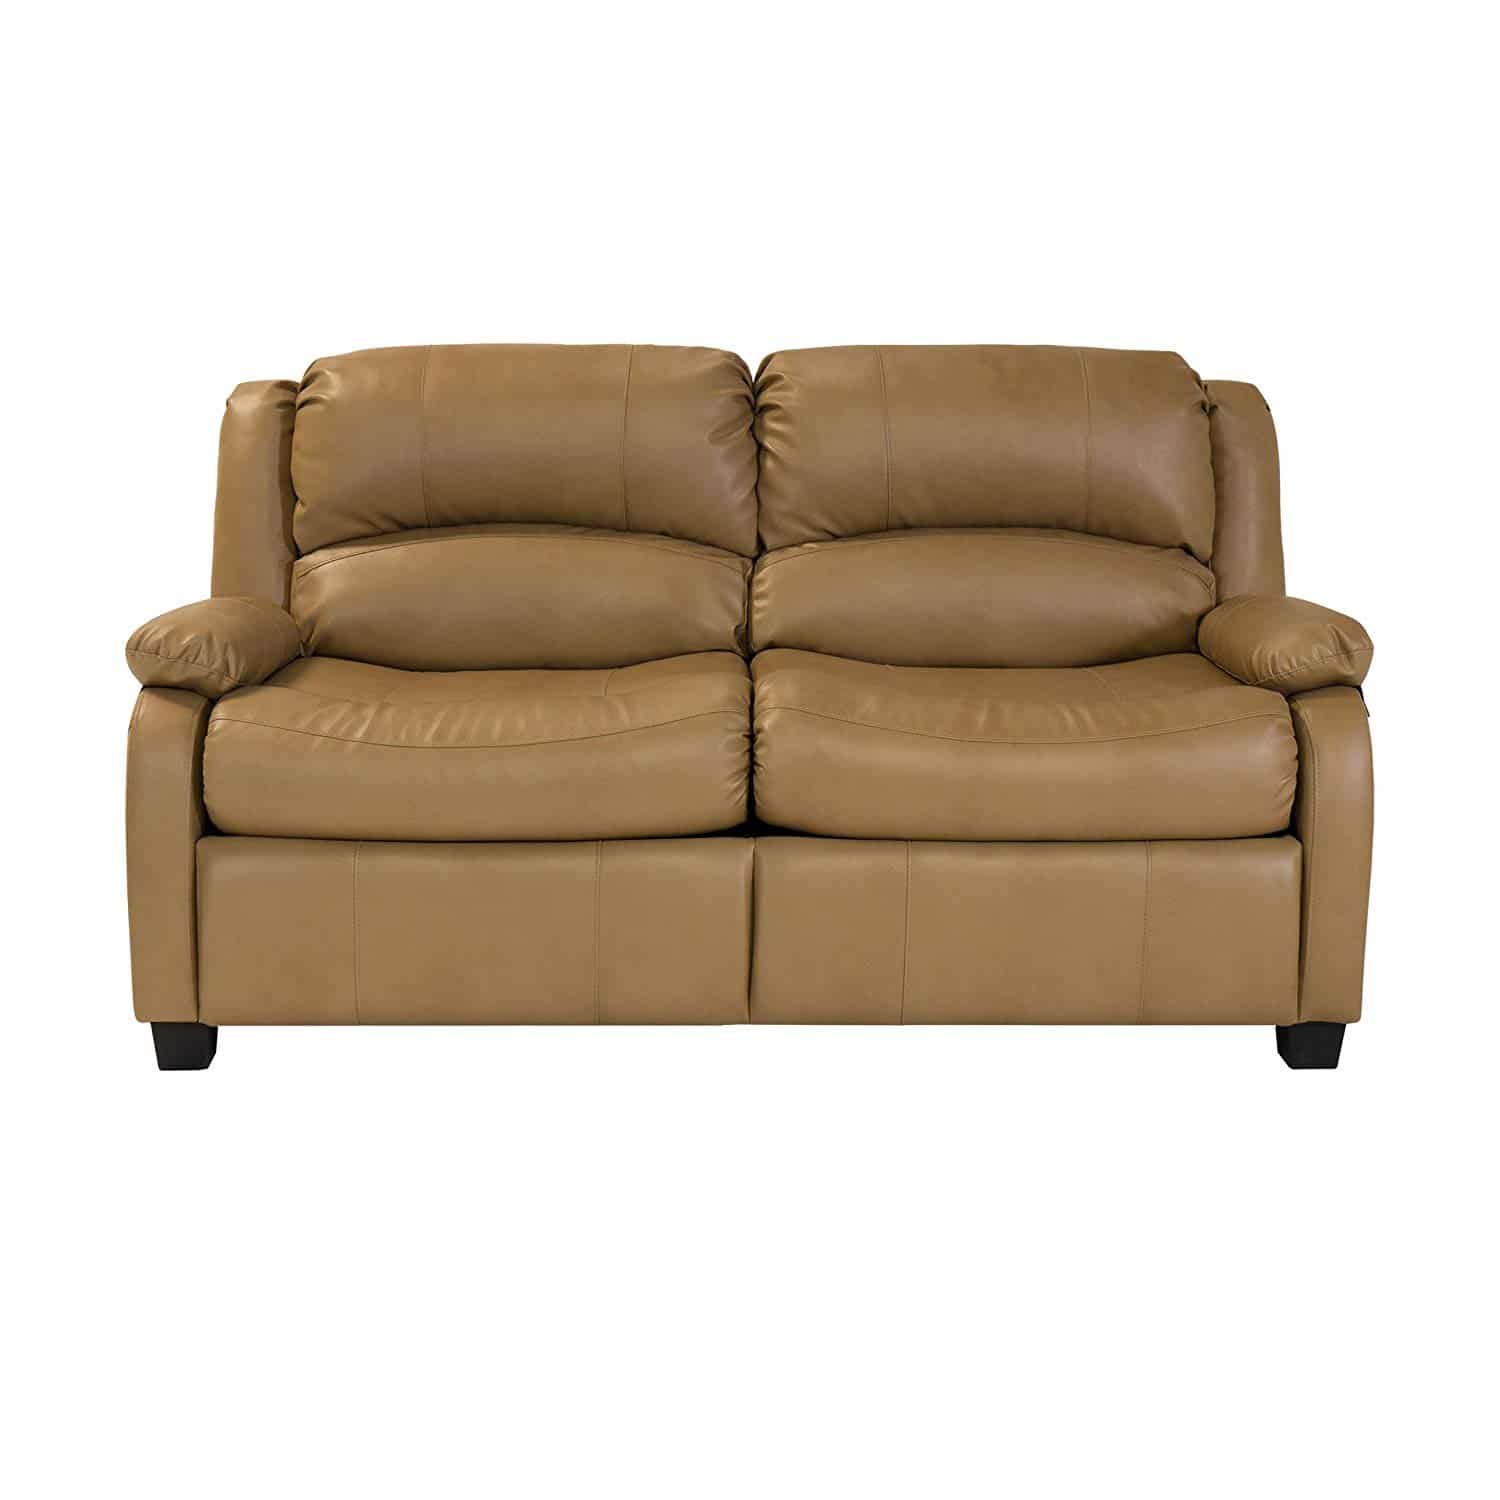 RecPro Charles Collection RV sofa